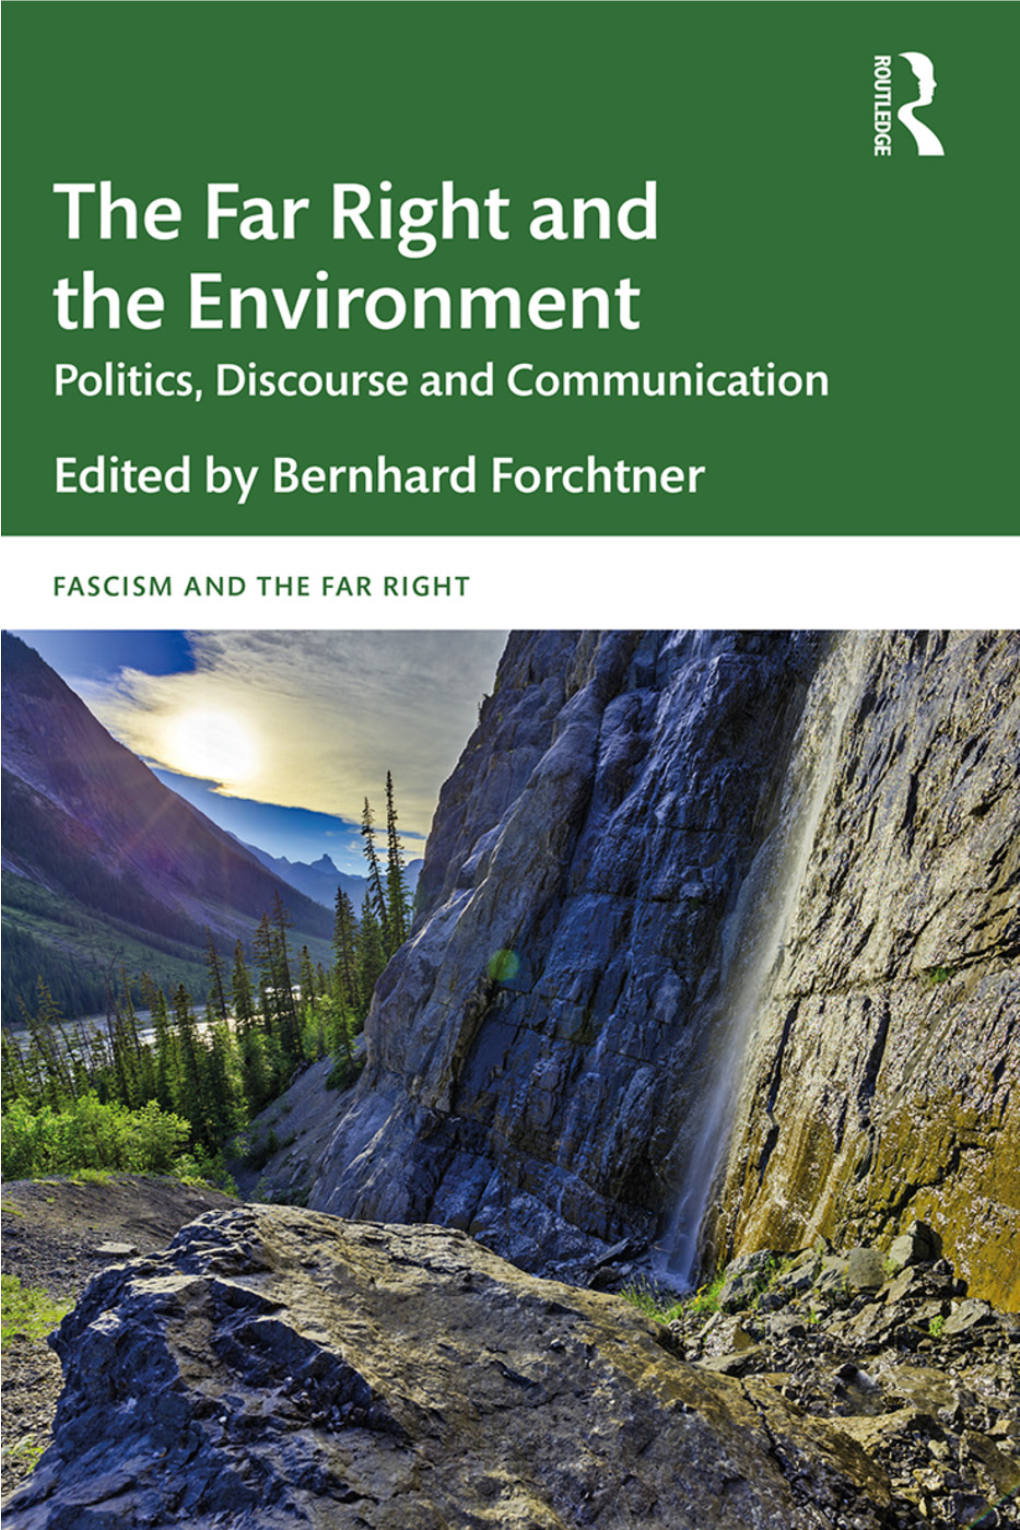 The Far Right and the Environment